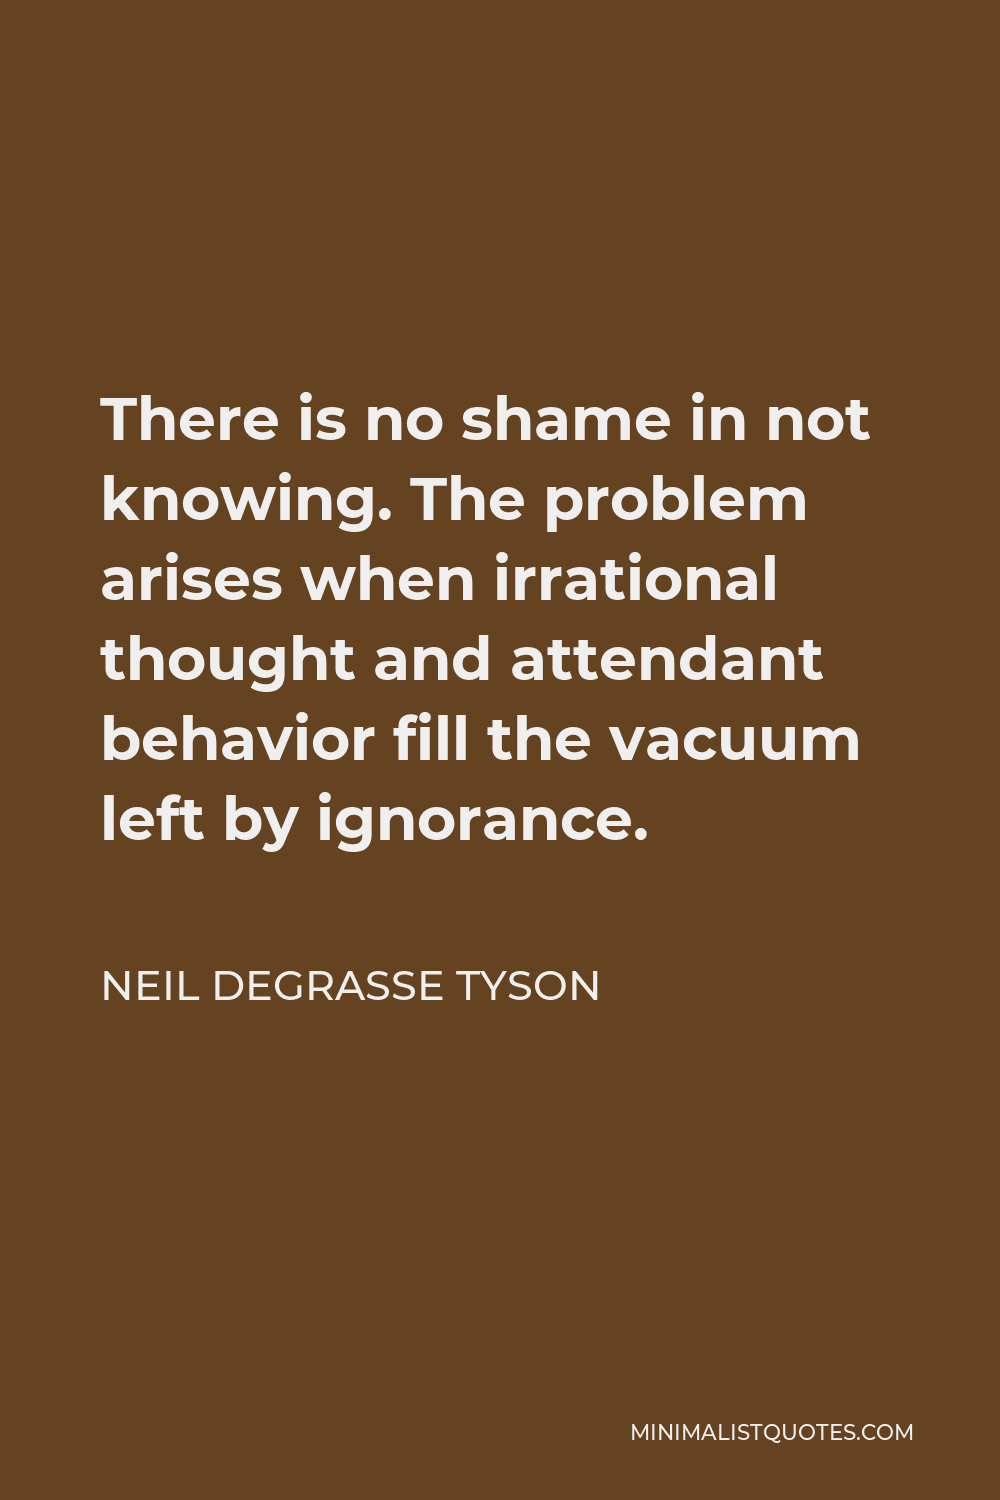 Neil deGrasse Tyson Quote - There is no shame in not knowing. The problem arises when irrational thought and attendant behavior fill the vacuum left by ignorance.